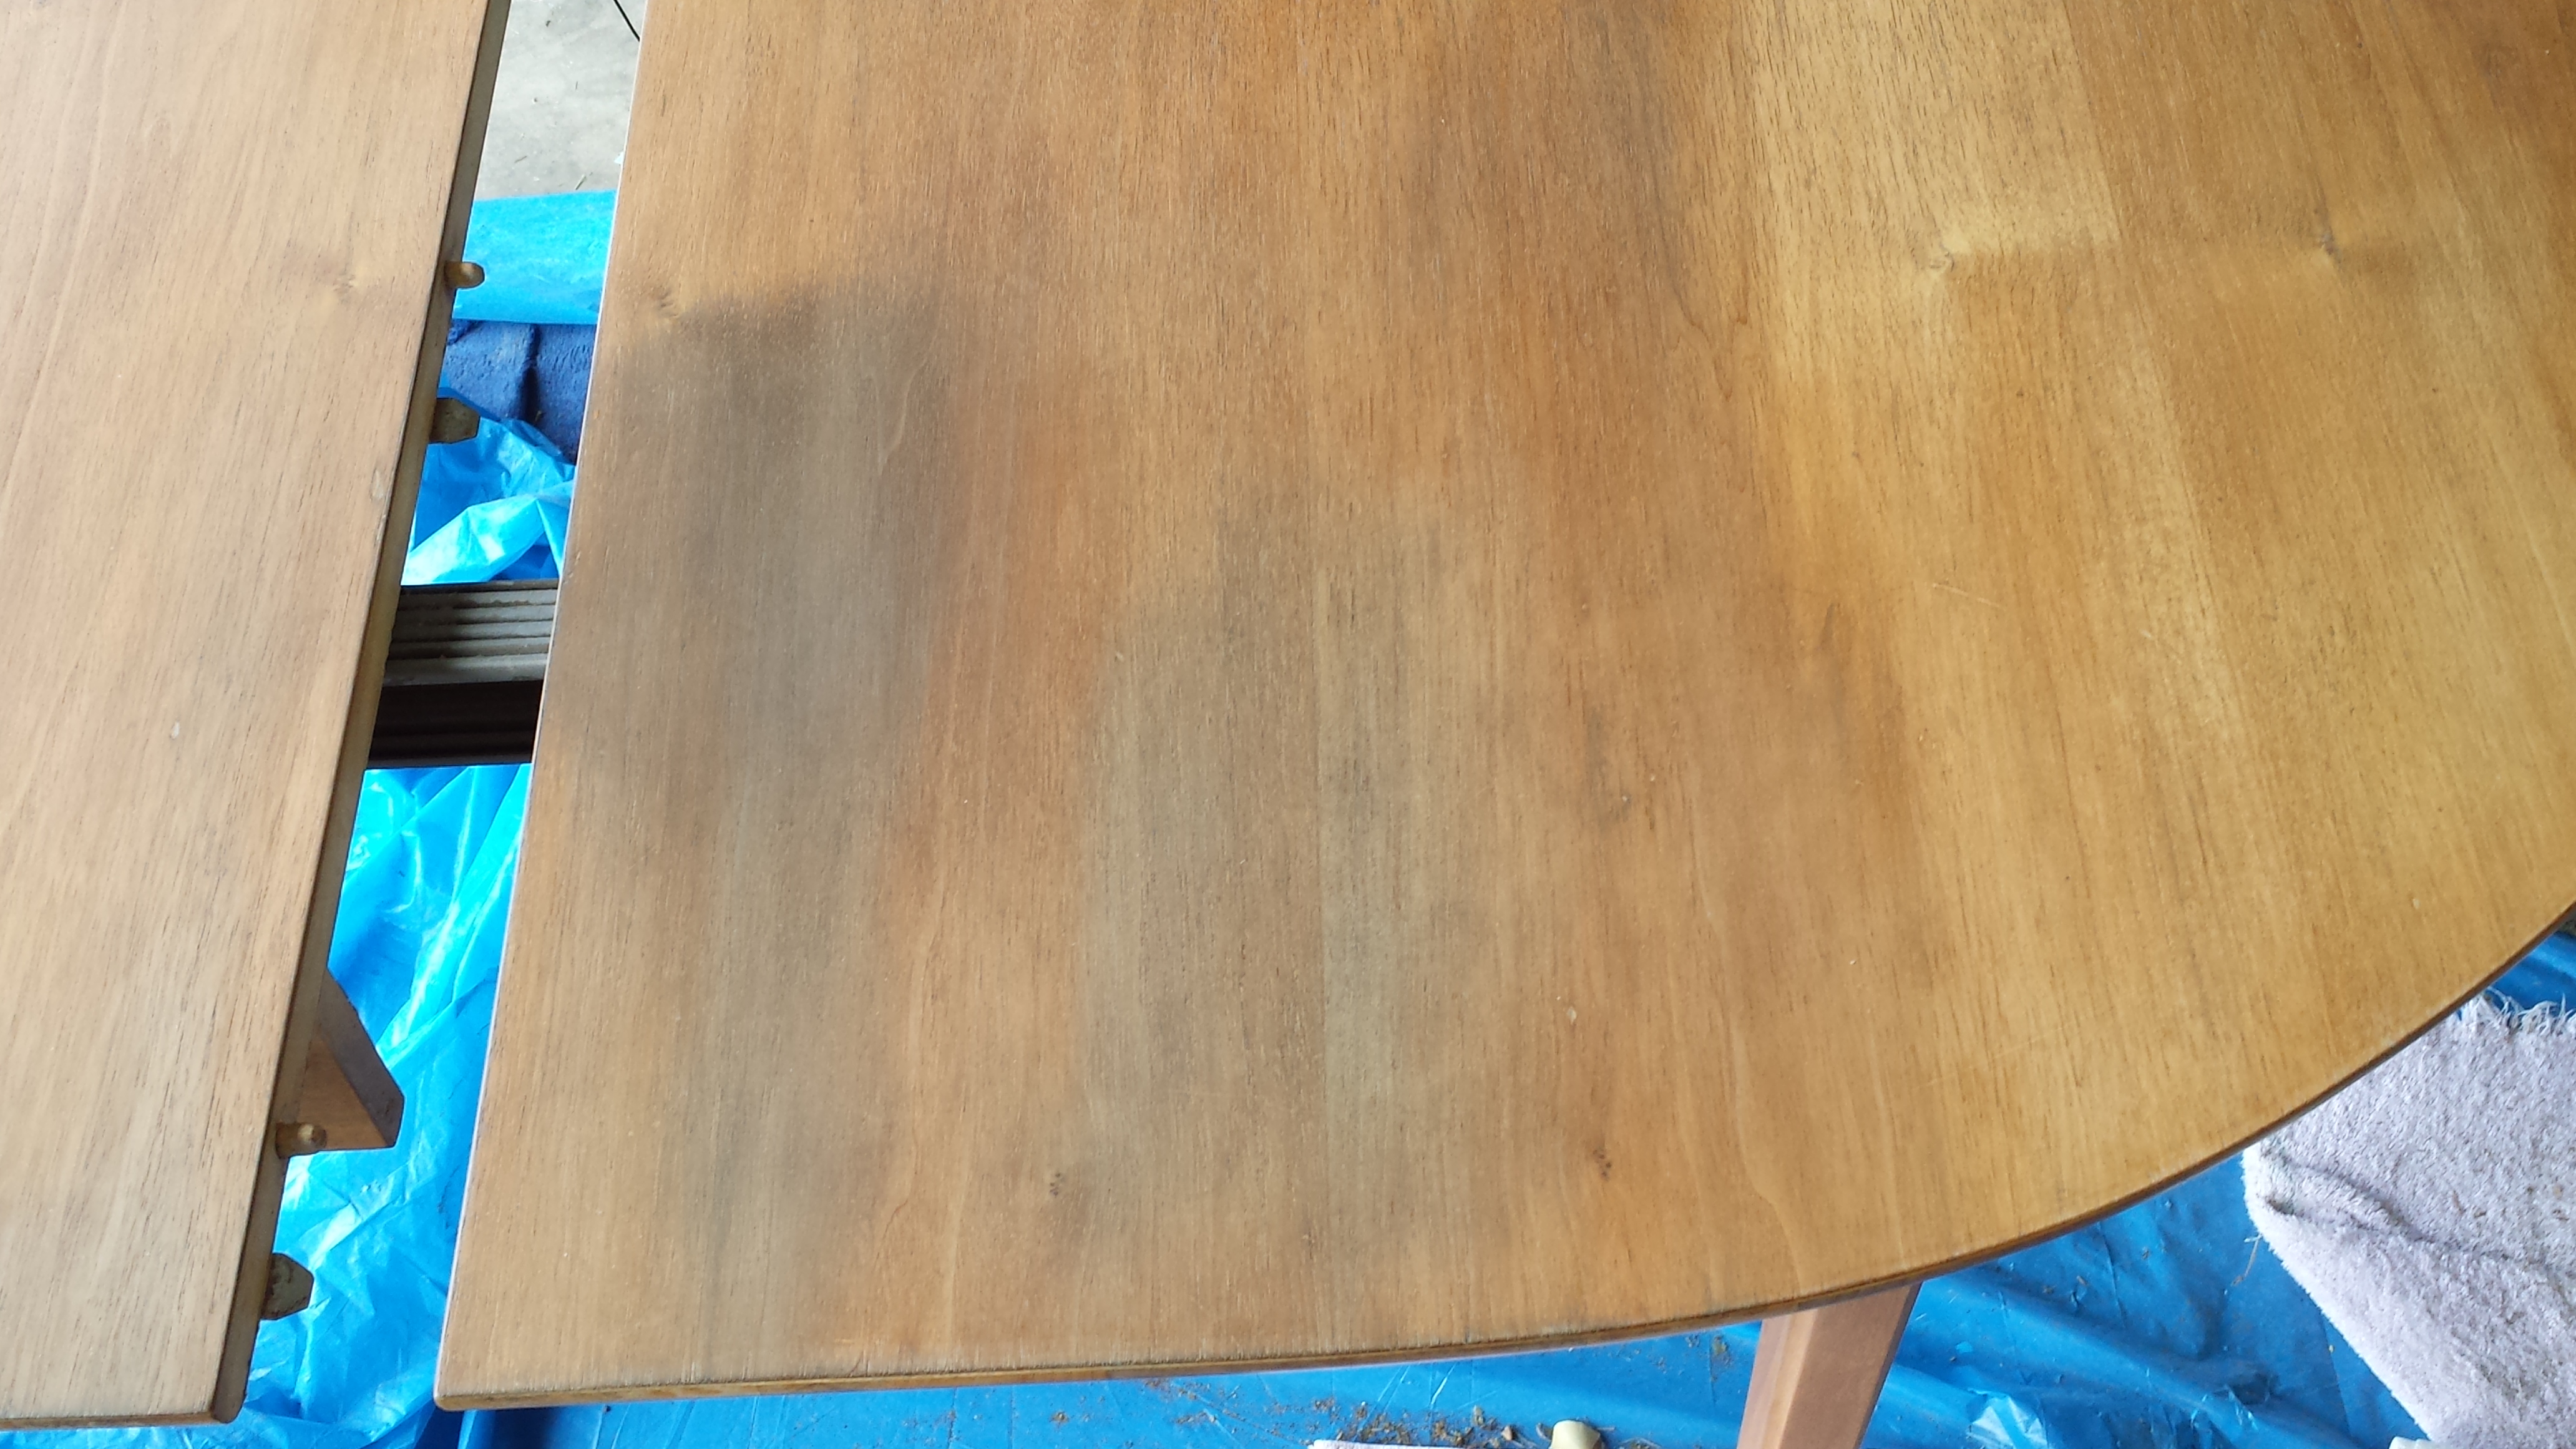 How do I restore discolored wood tabletop? - Ask an Expert